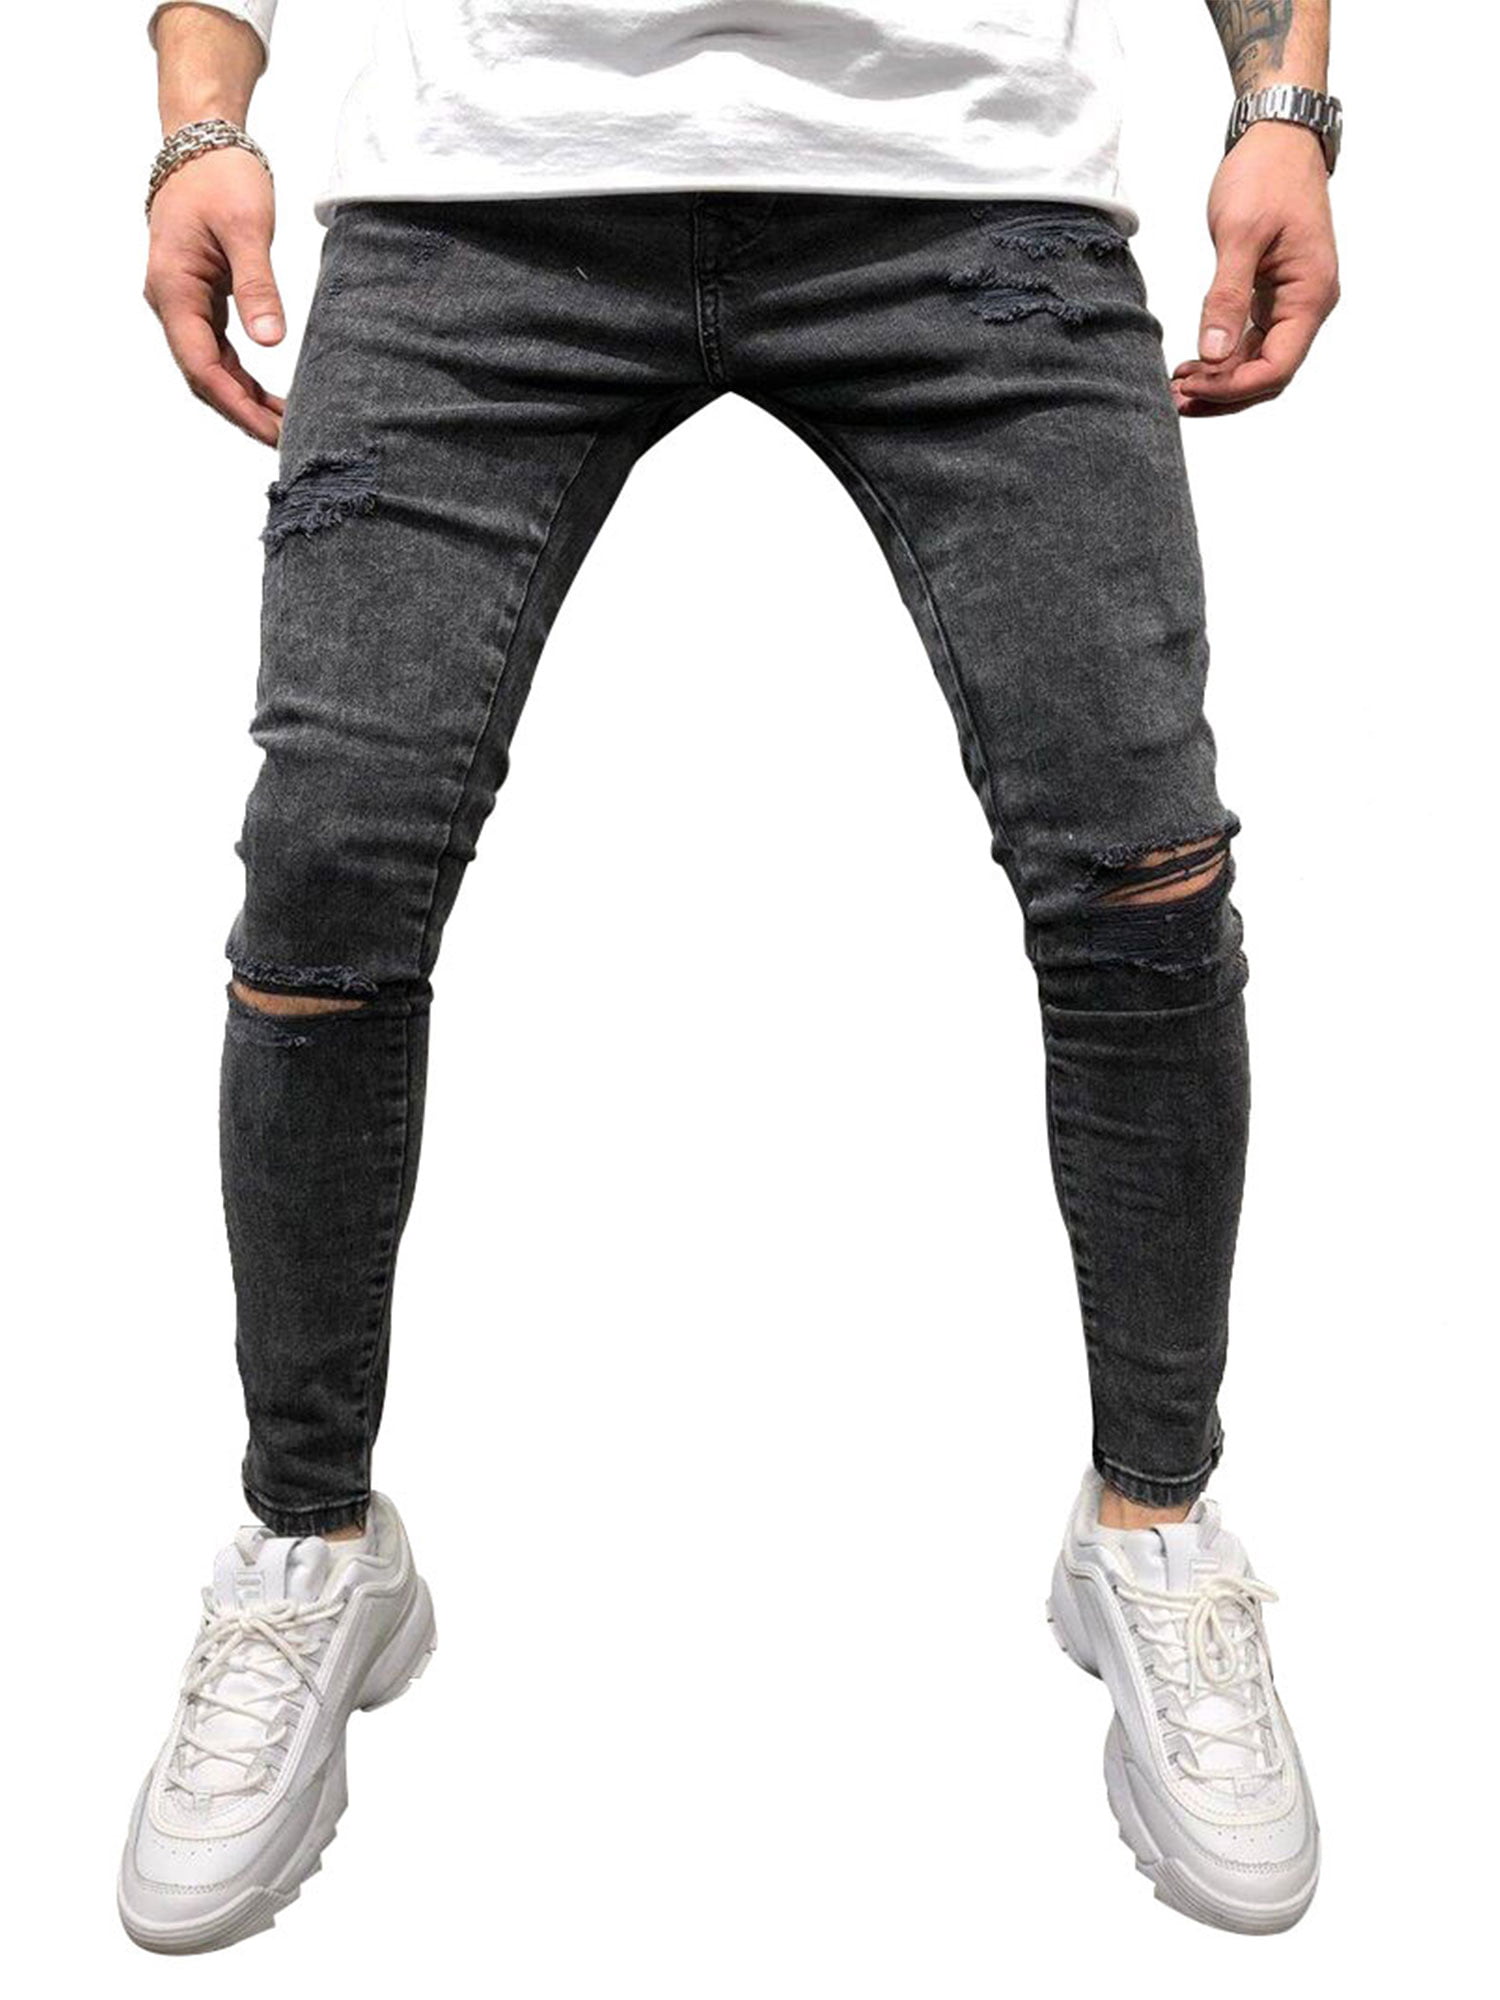 Mens Ripped Destroyed Pants Skinny Stretch Denim Jeans Slim Fit Trousers Fashion 